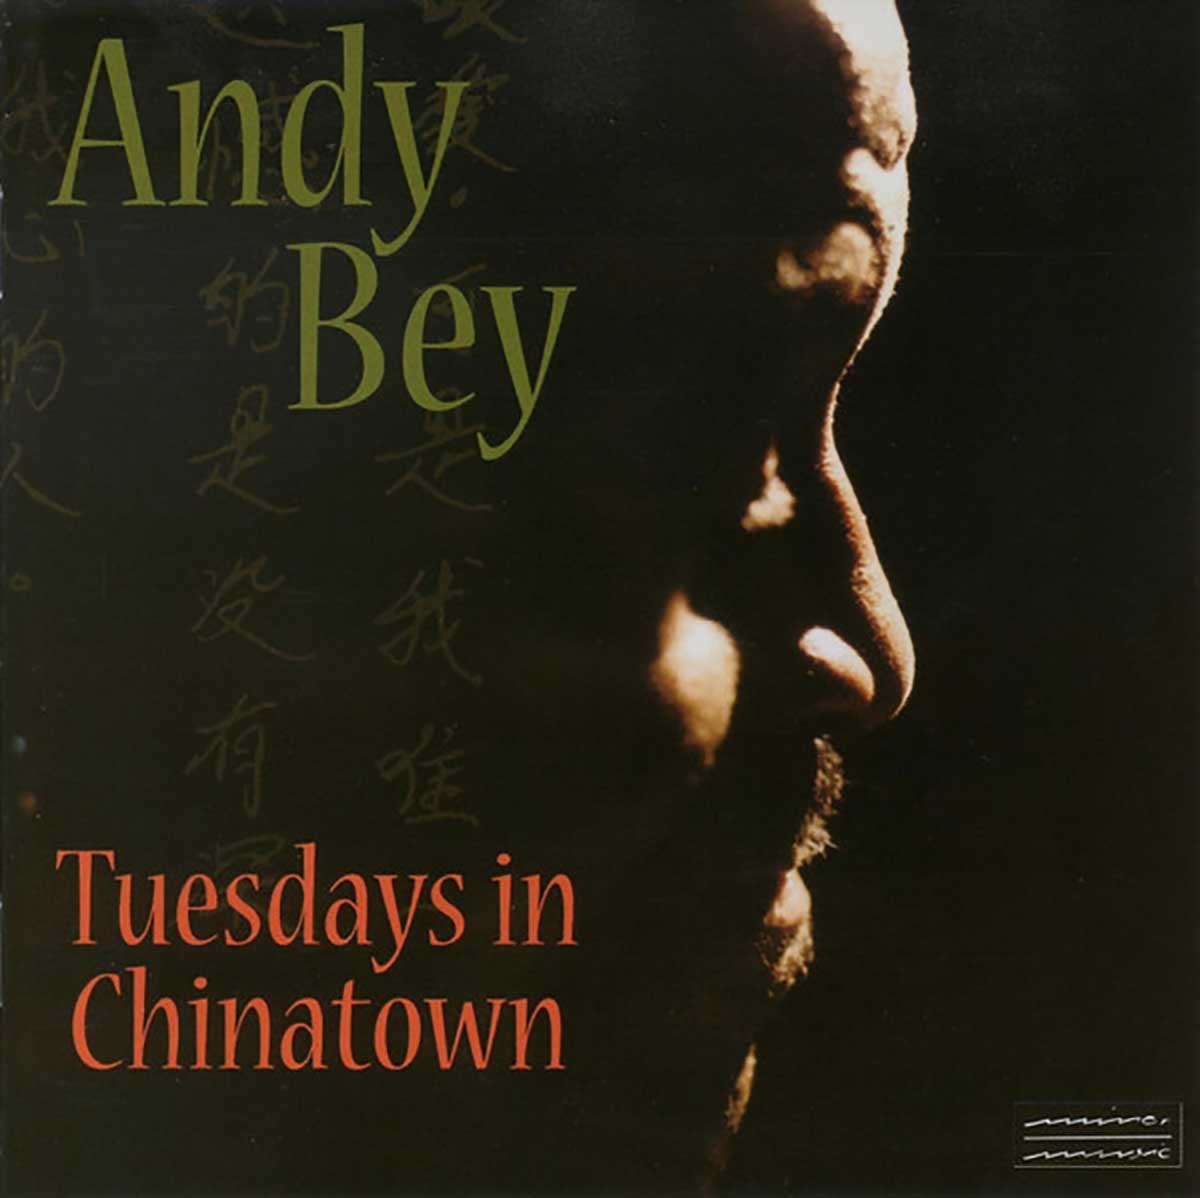 Andy Bey Tuesday in Chinatown